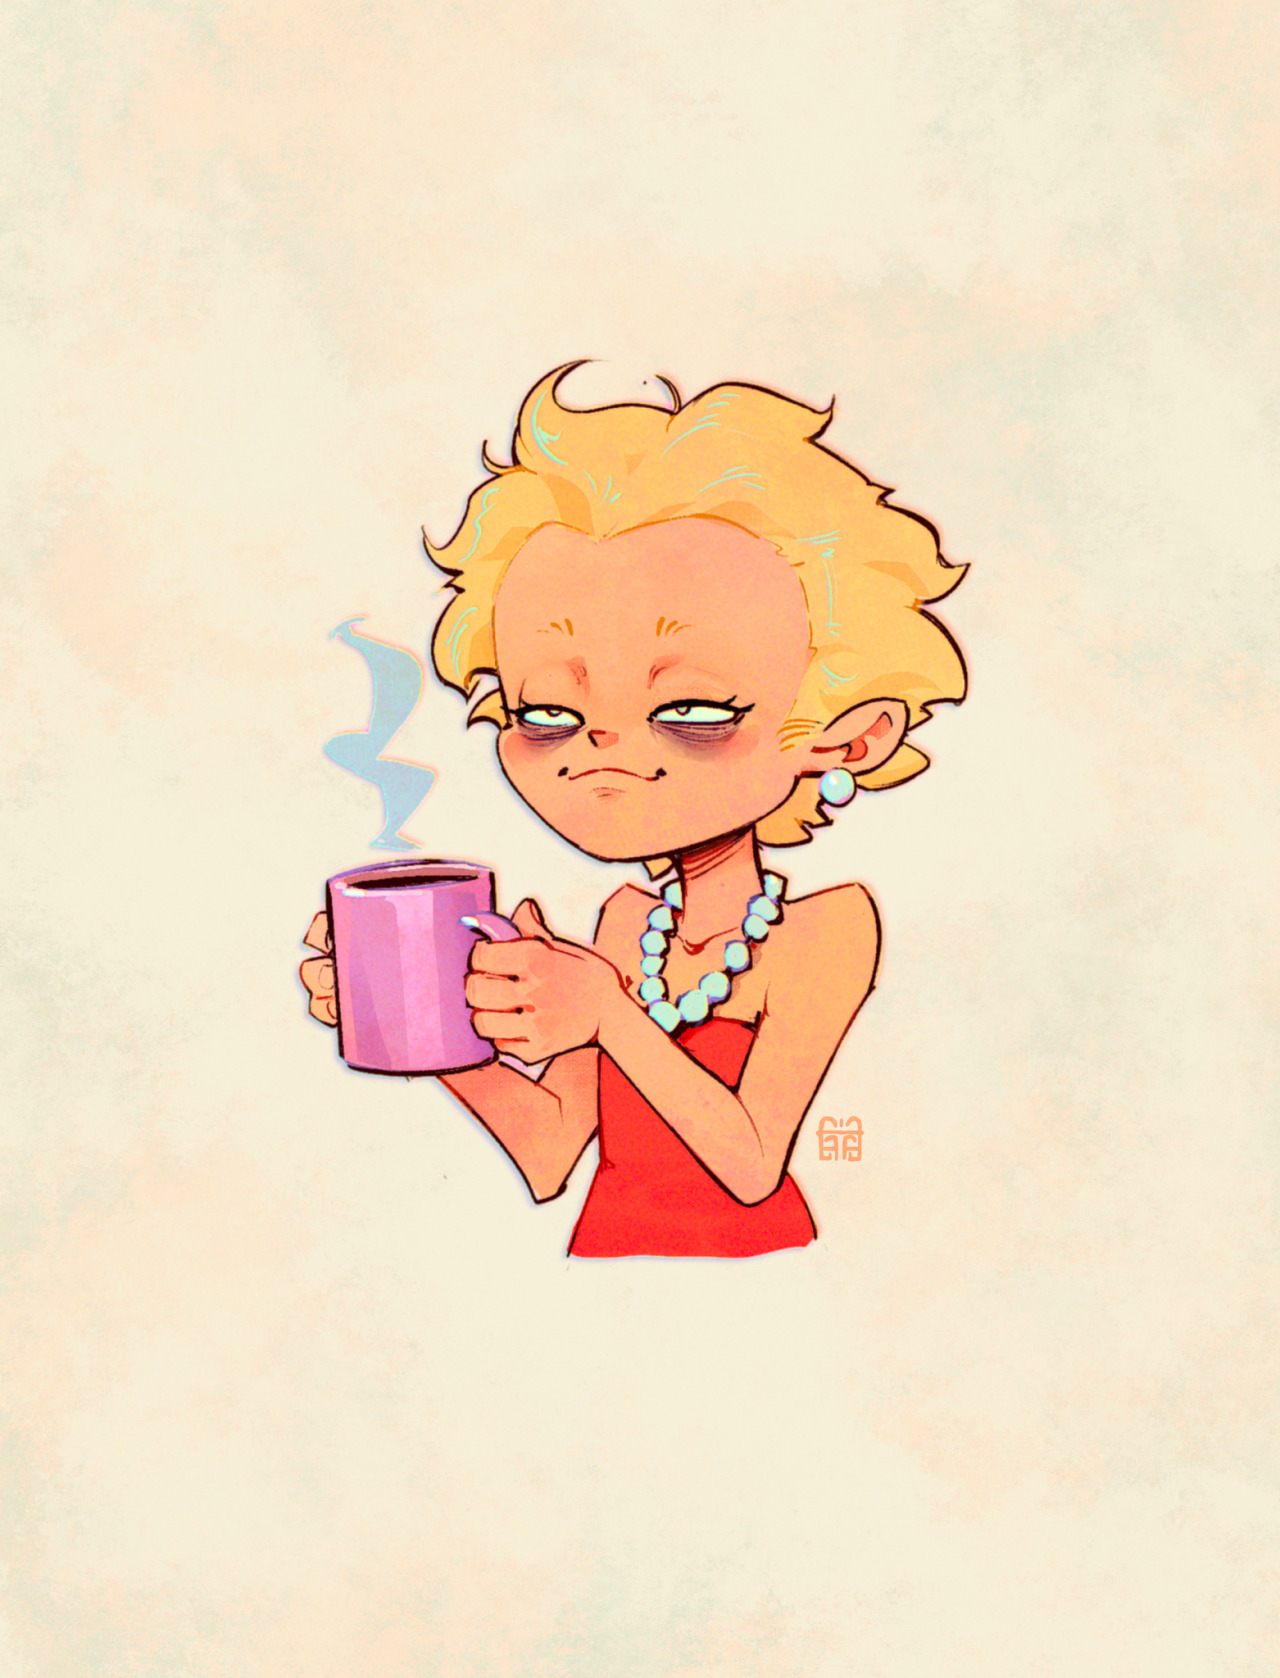 lisa simpson enjoying a cup of coffee. she knows perfectly well its not good for her